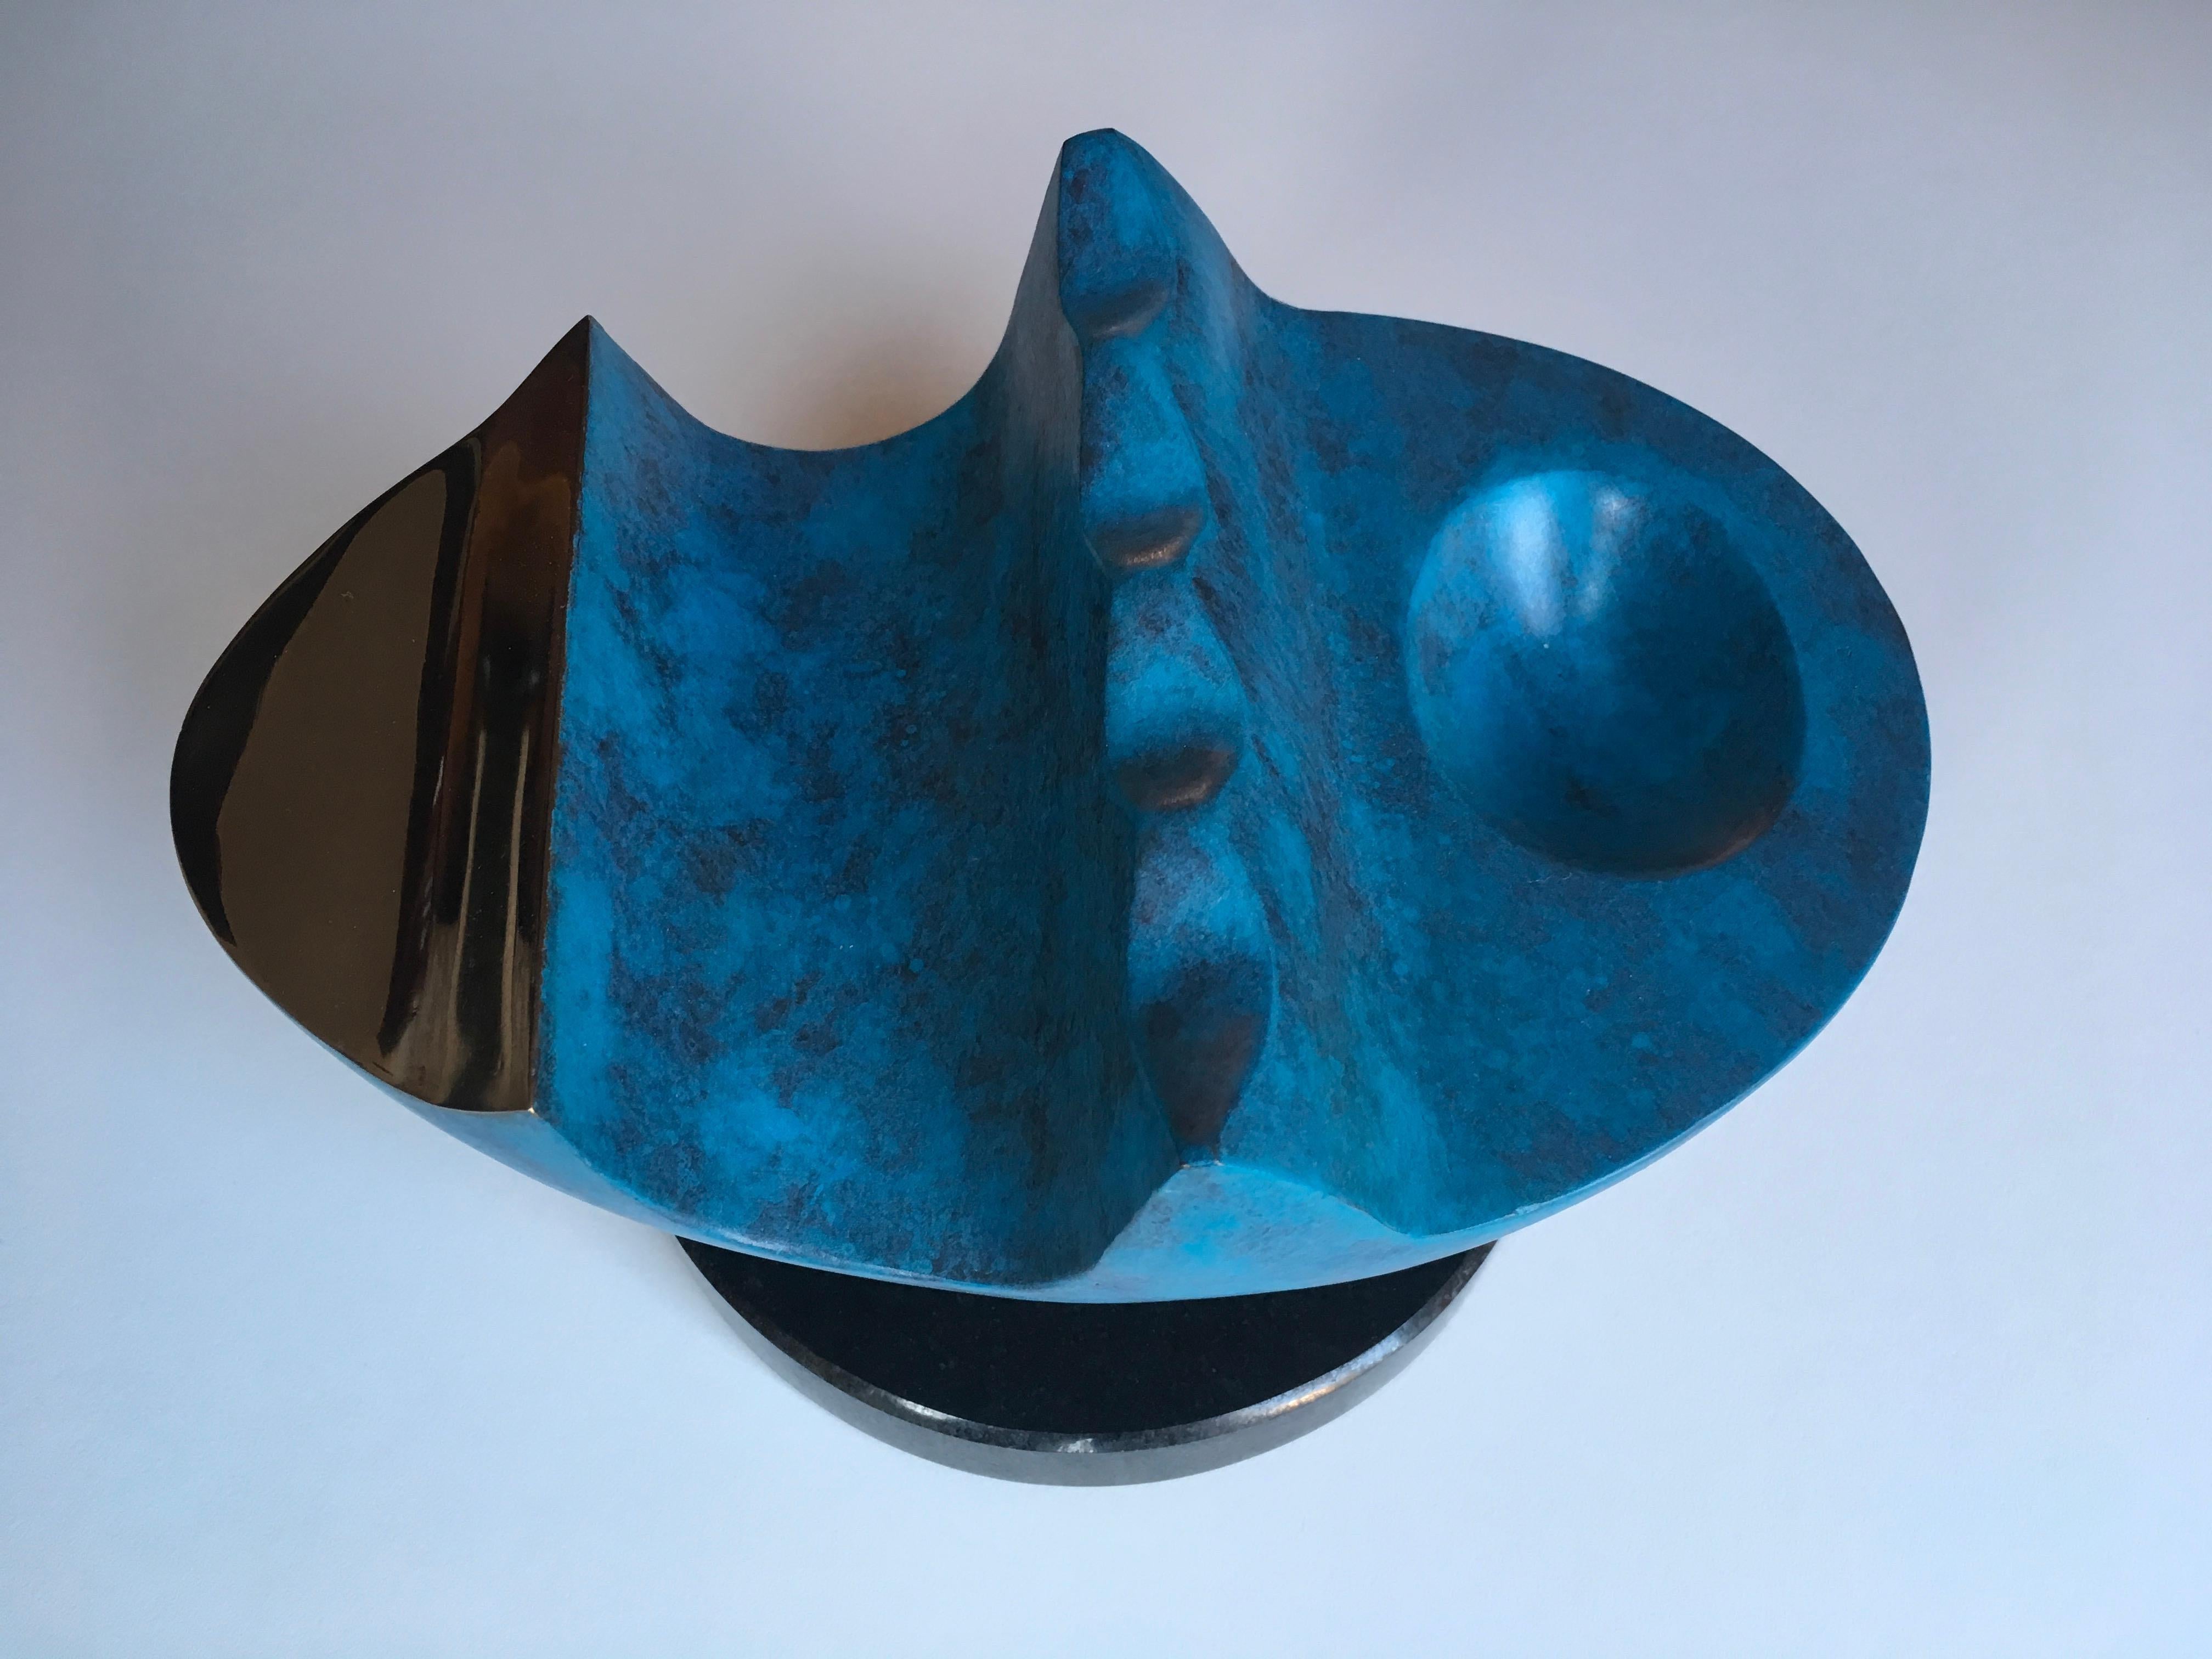 Tidal Stone  - Tabletop limited edition sculpture Bronze  - Gold Still-Life Sculpture by David Sprakes